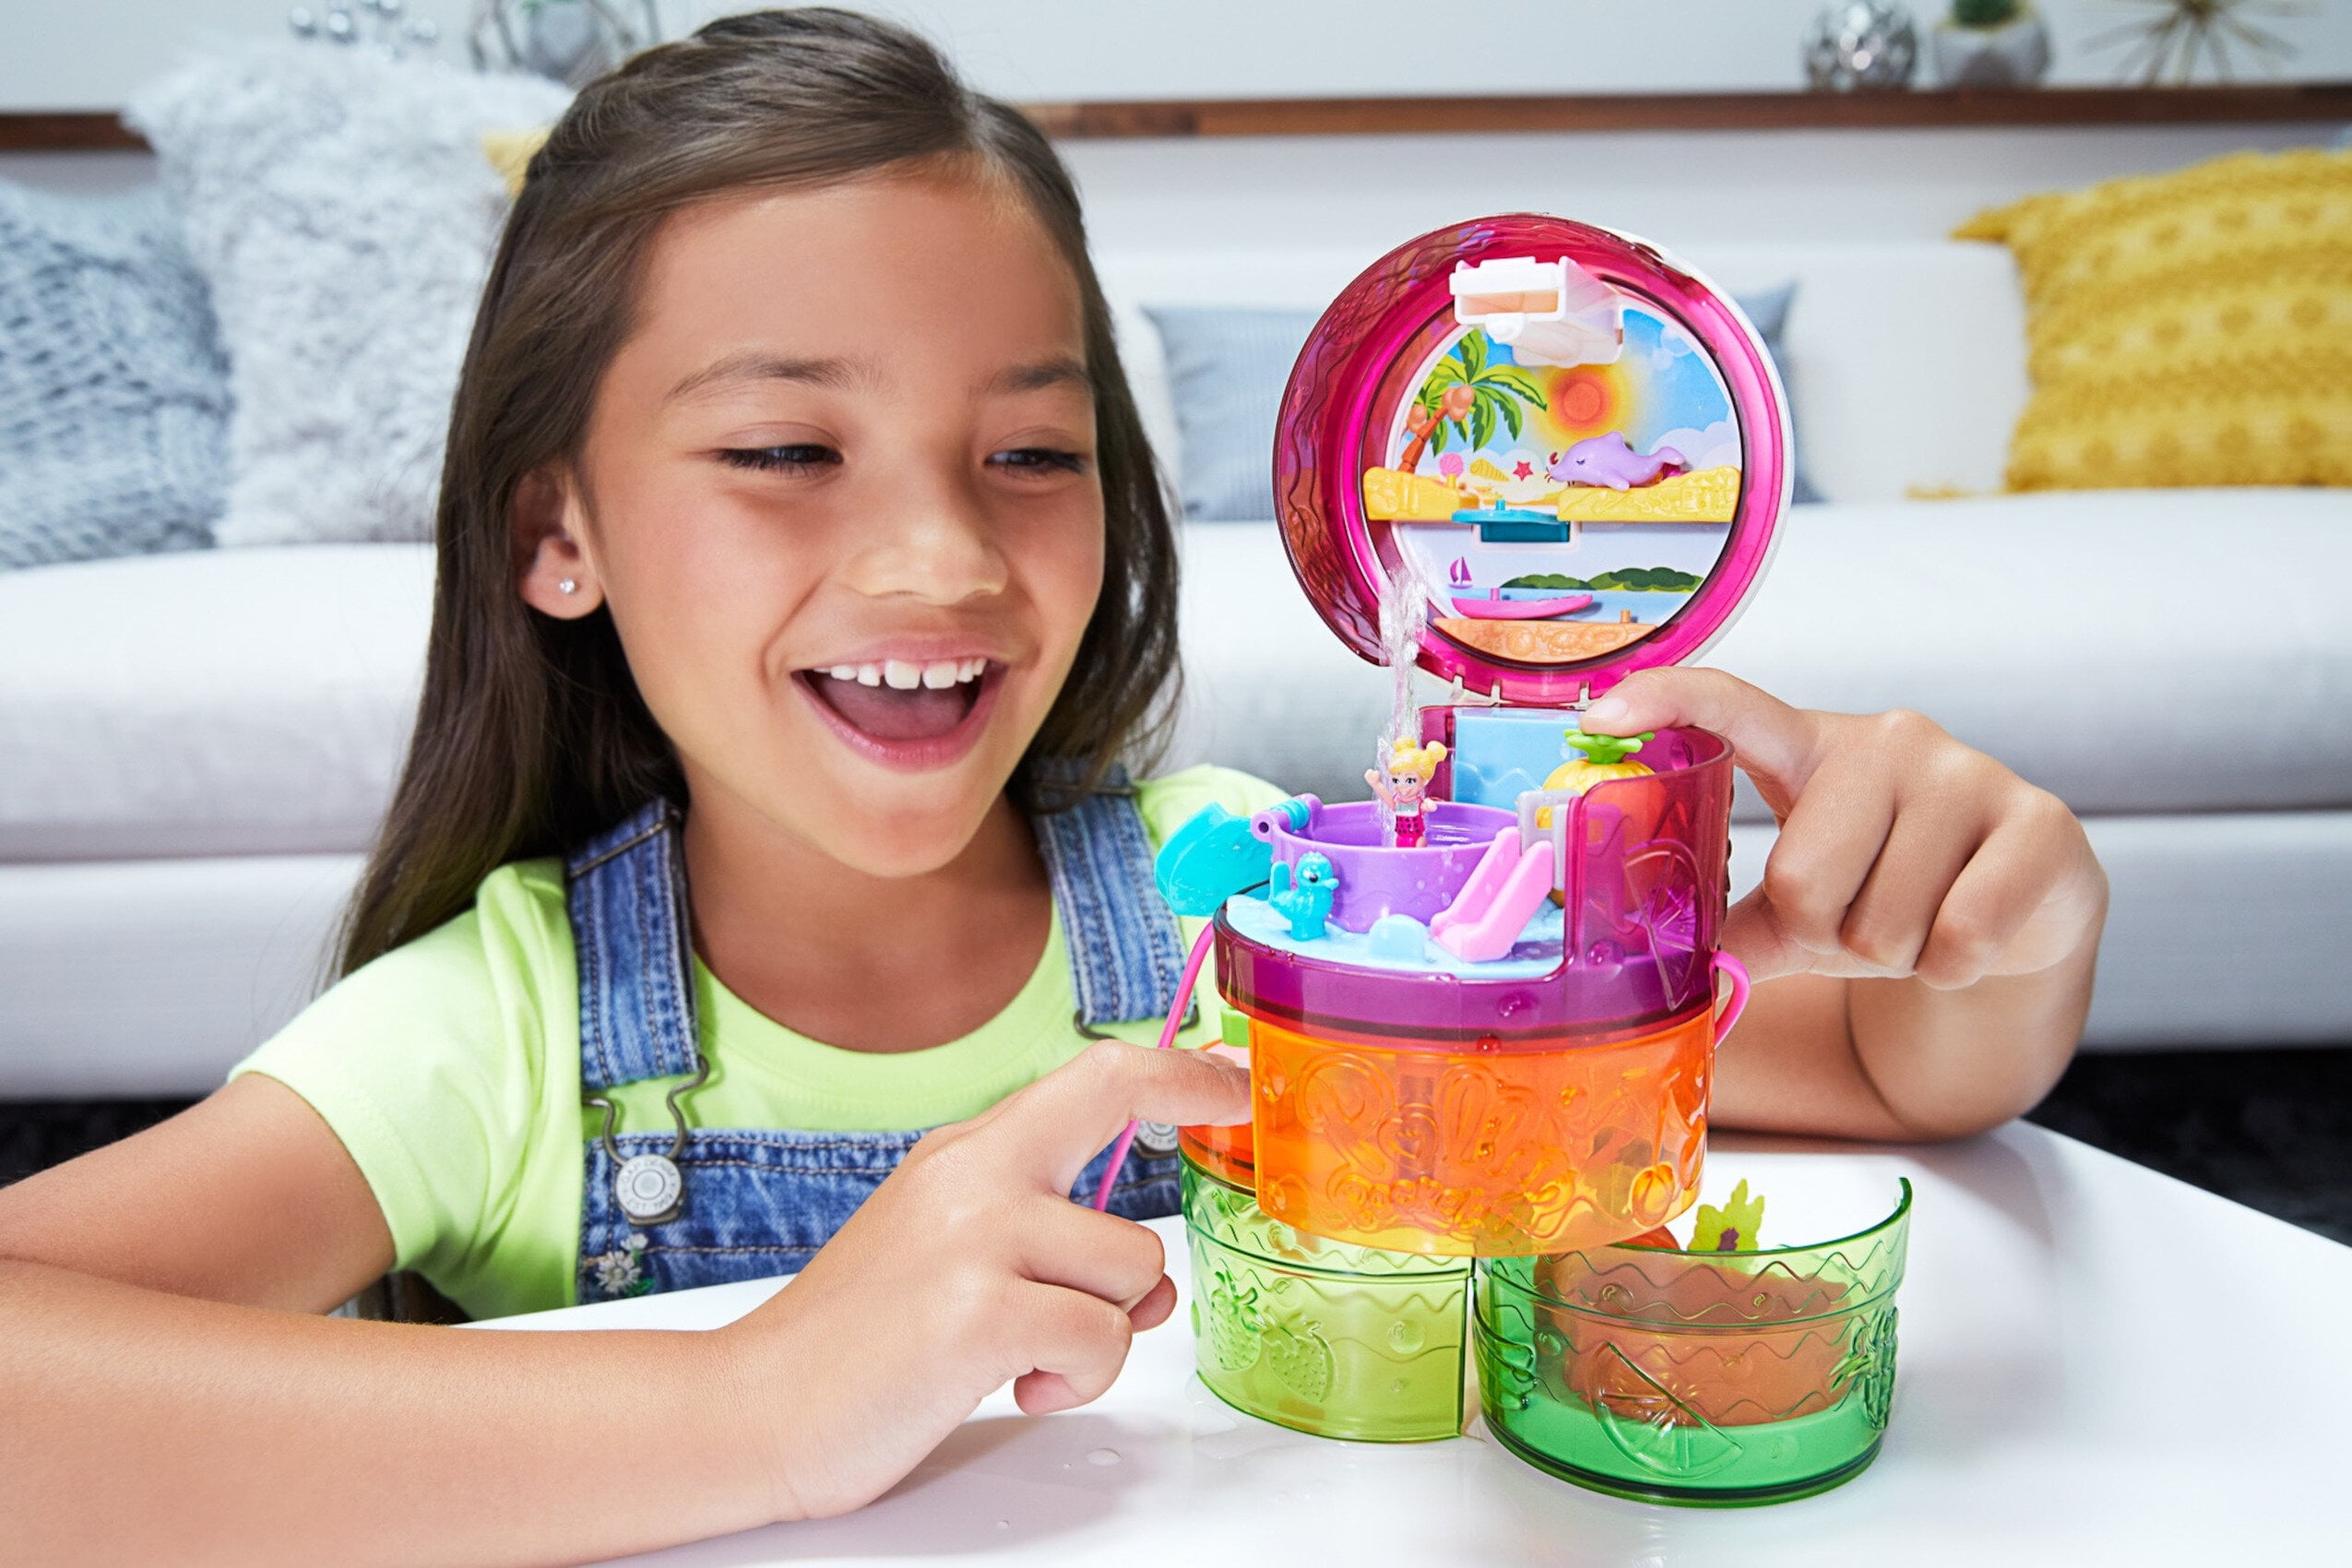 Great Gift for Ages 4 Years Old & Up Polly Pocket Spin ‘n Surprise Compact Playset 3 Floors Waterpark Theme Tropical Smoothie Shape 25 Surprise Accessories Including Polly & Shani Dolls